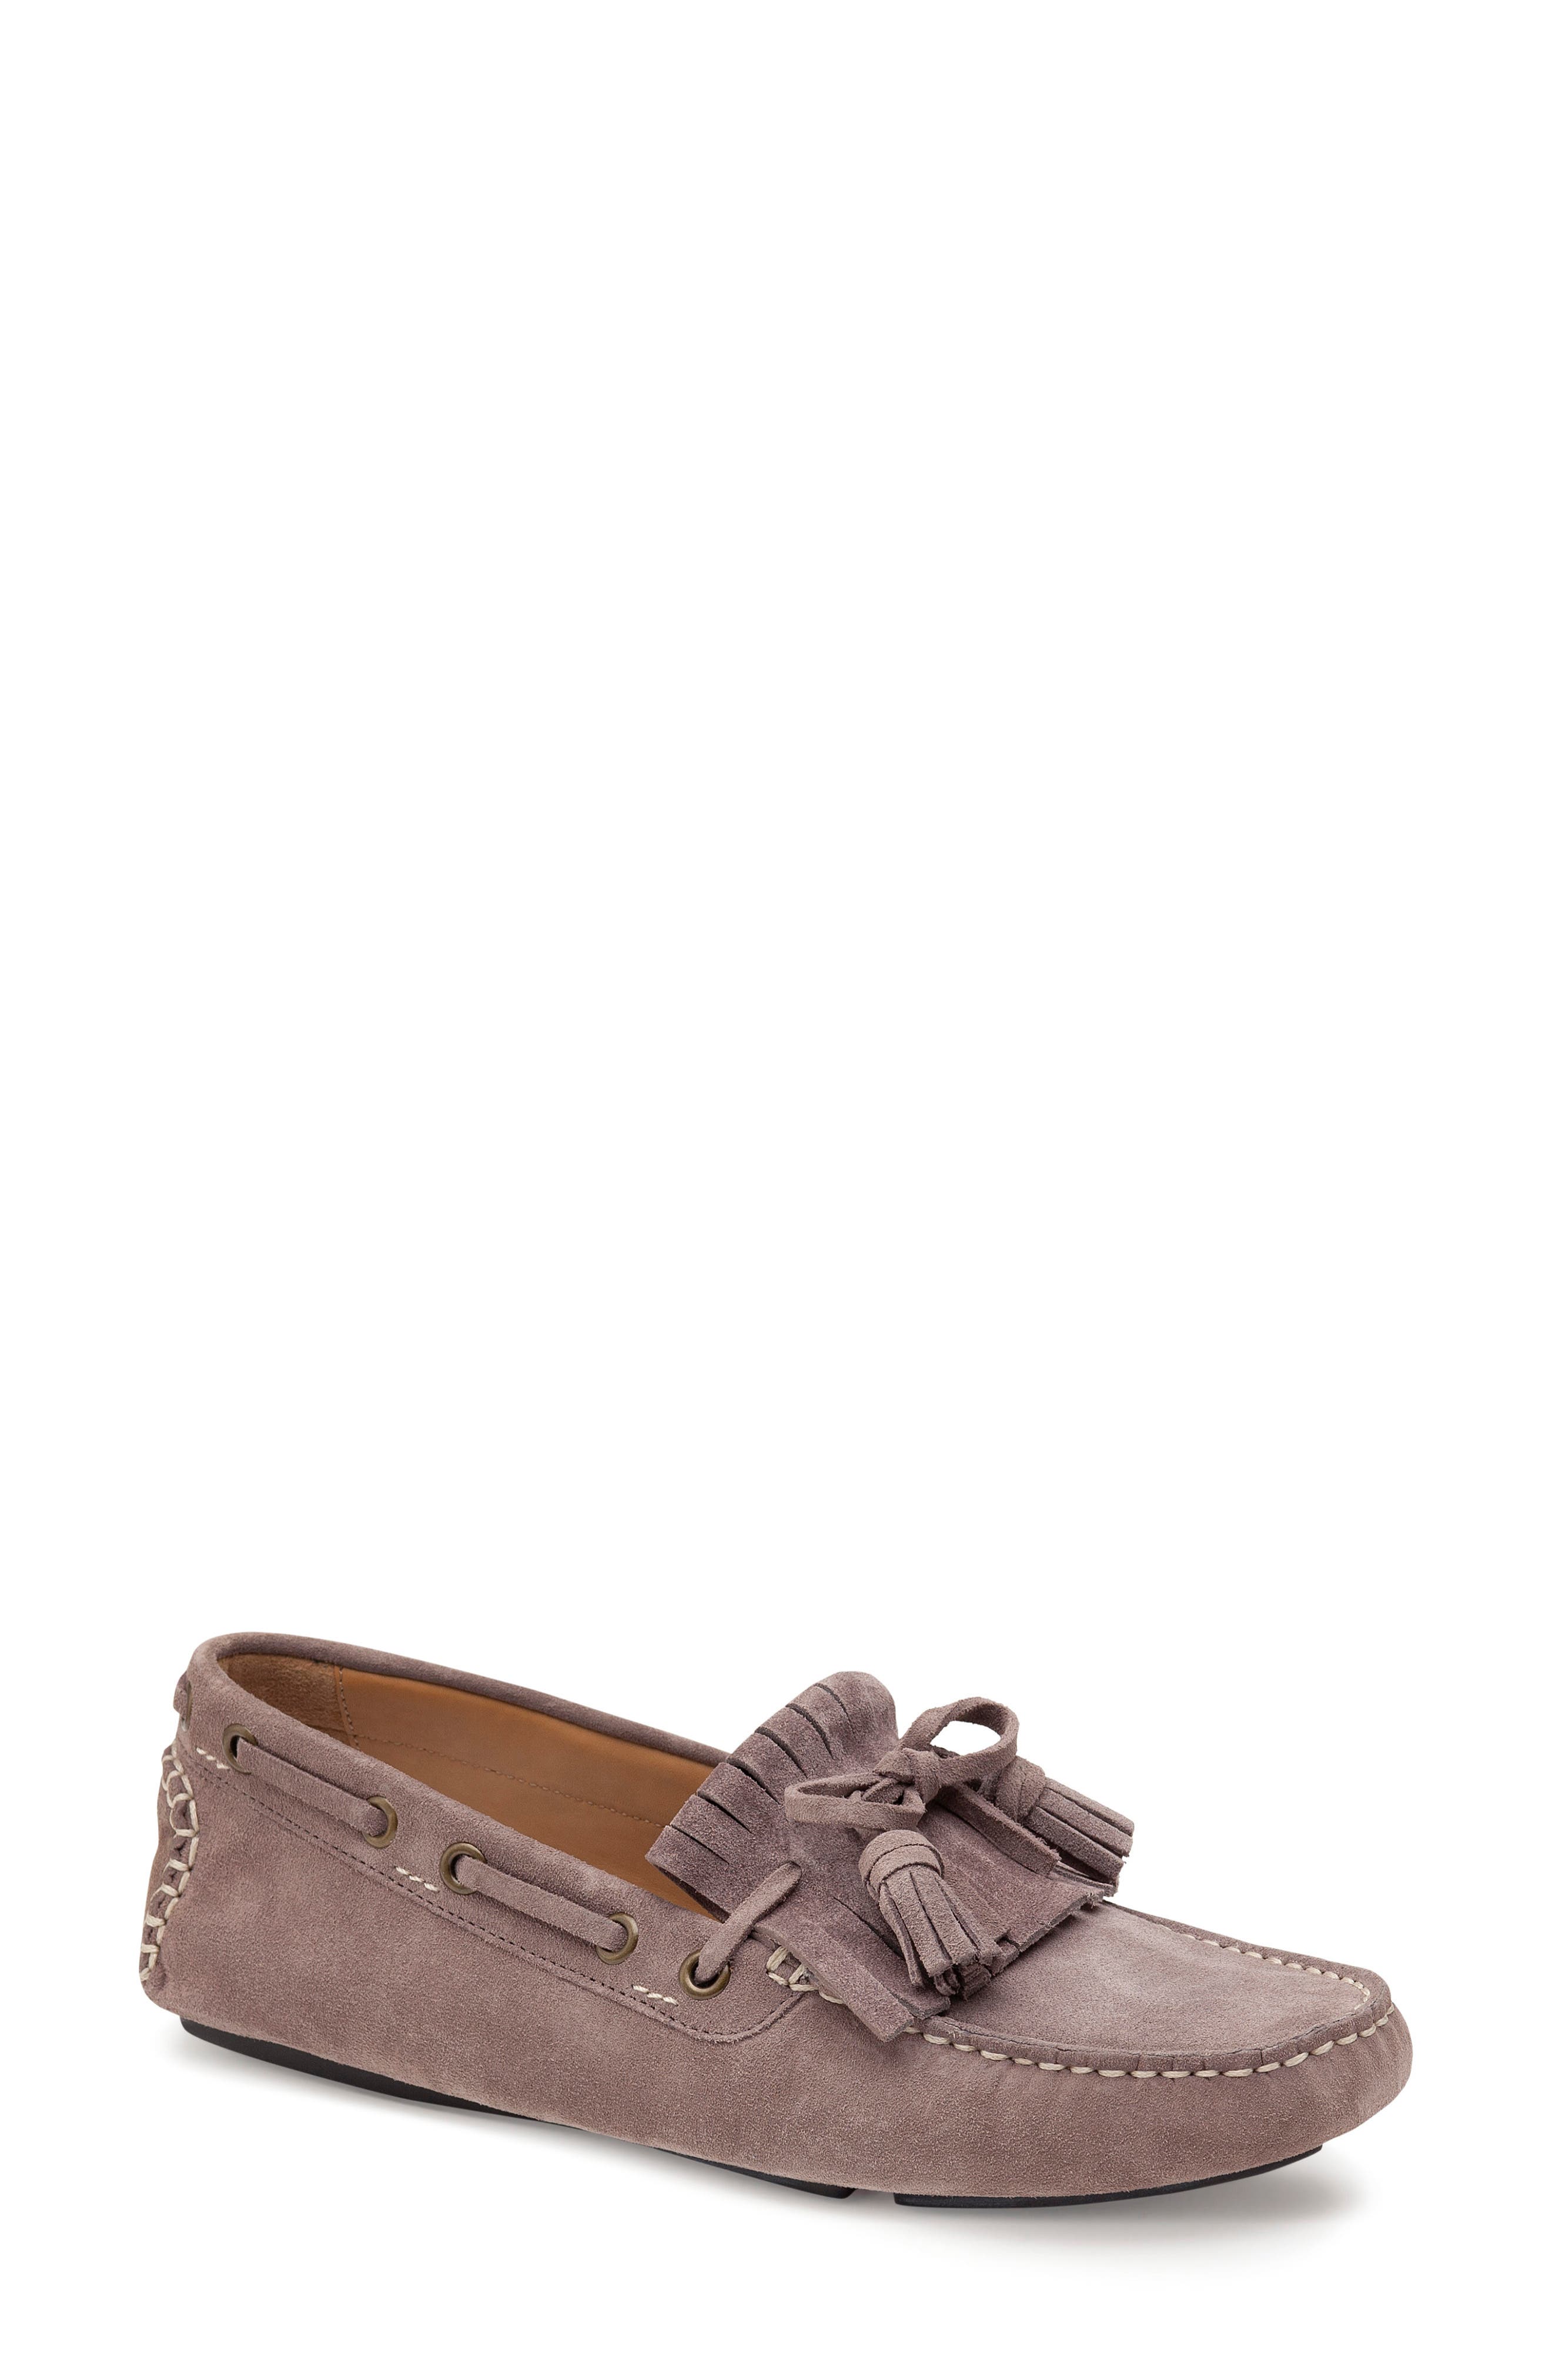 Johnston & Murphy Womens Maggie Camp Moccasin